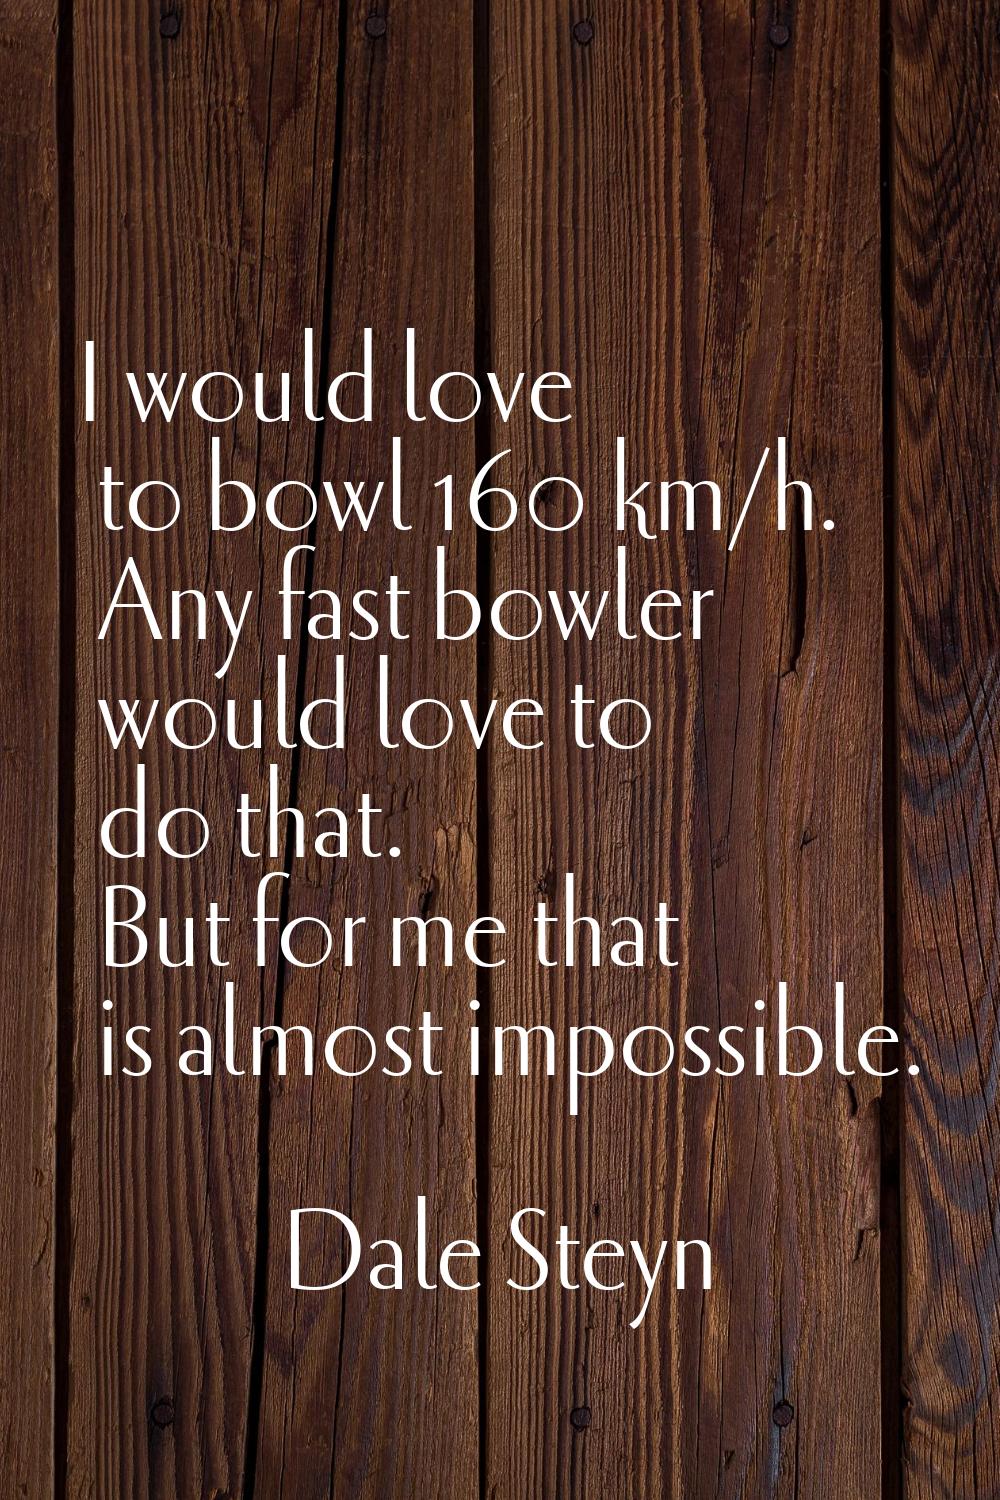 I would love to bowl 160 km/h. Any fast bowler would love to do that. But for me that is almost imp